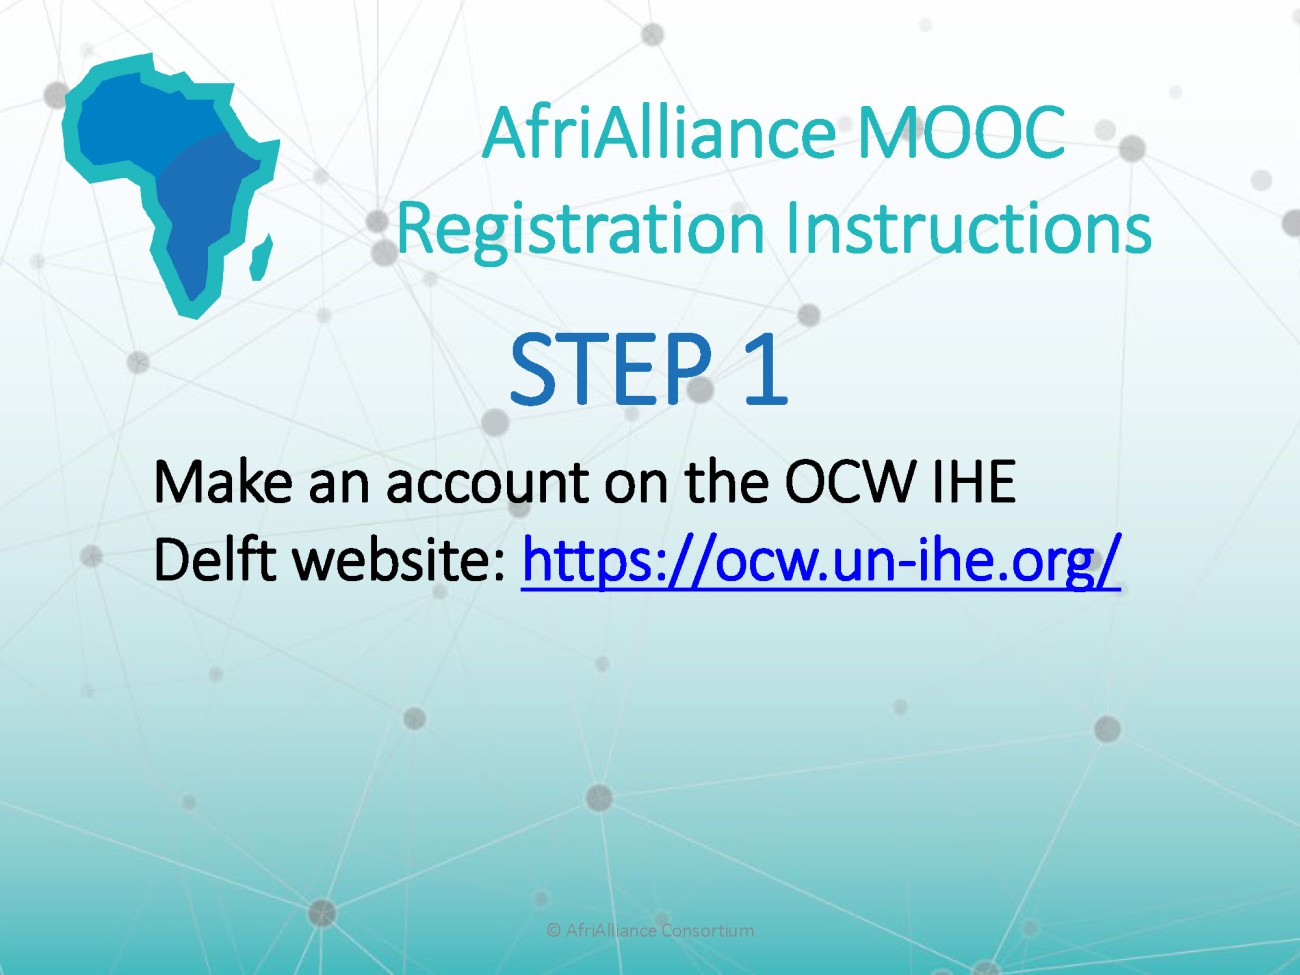 Step 1 of the instructions to enrolling in AfriAlliance MOOCs